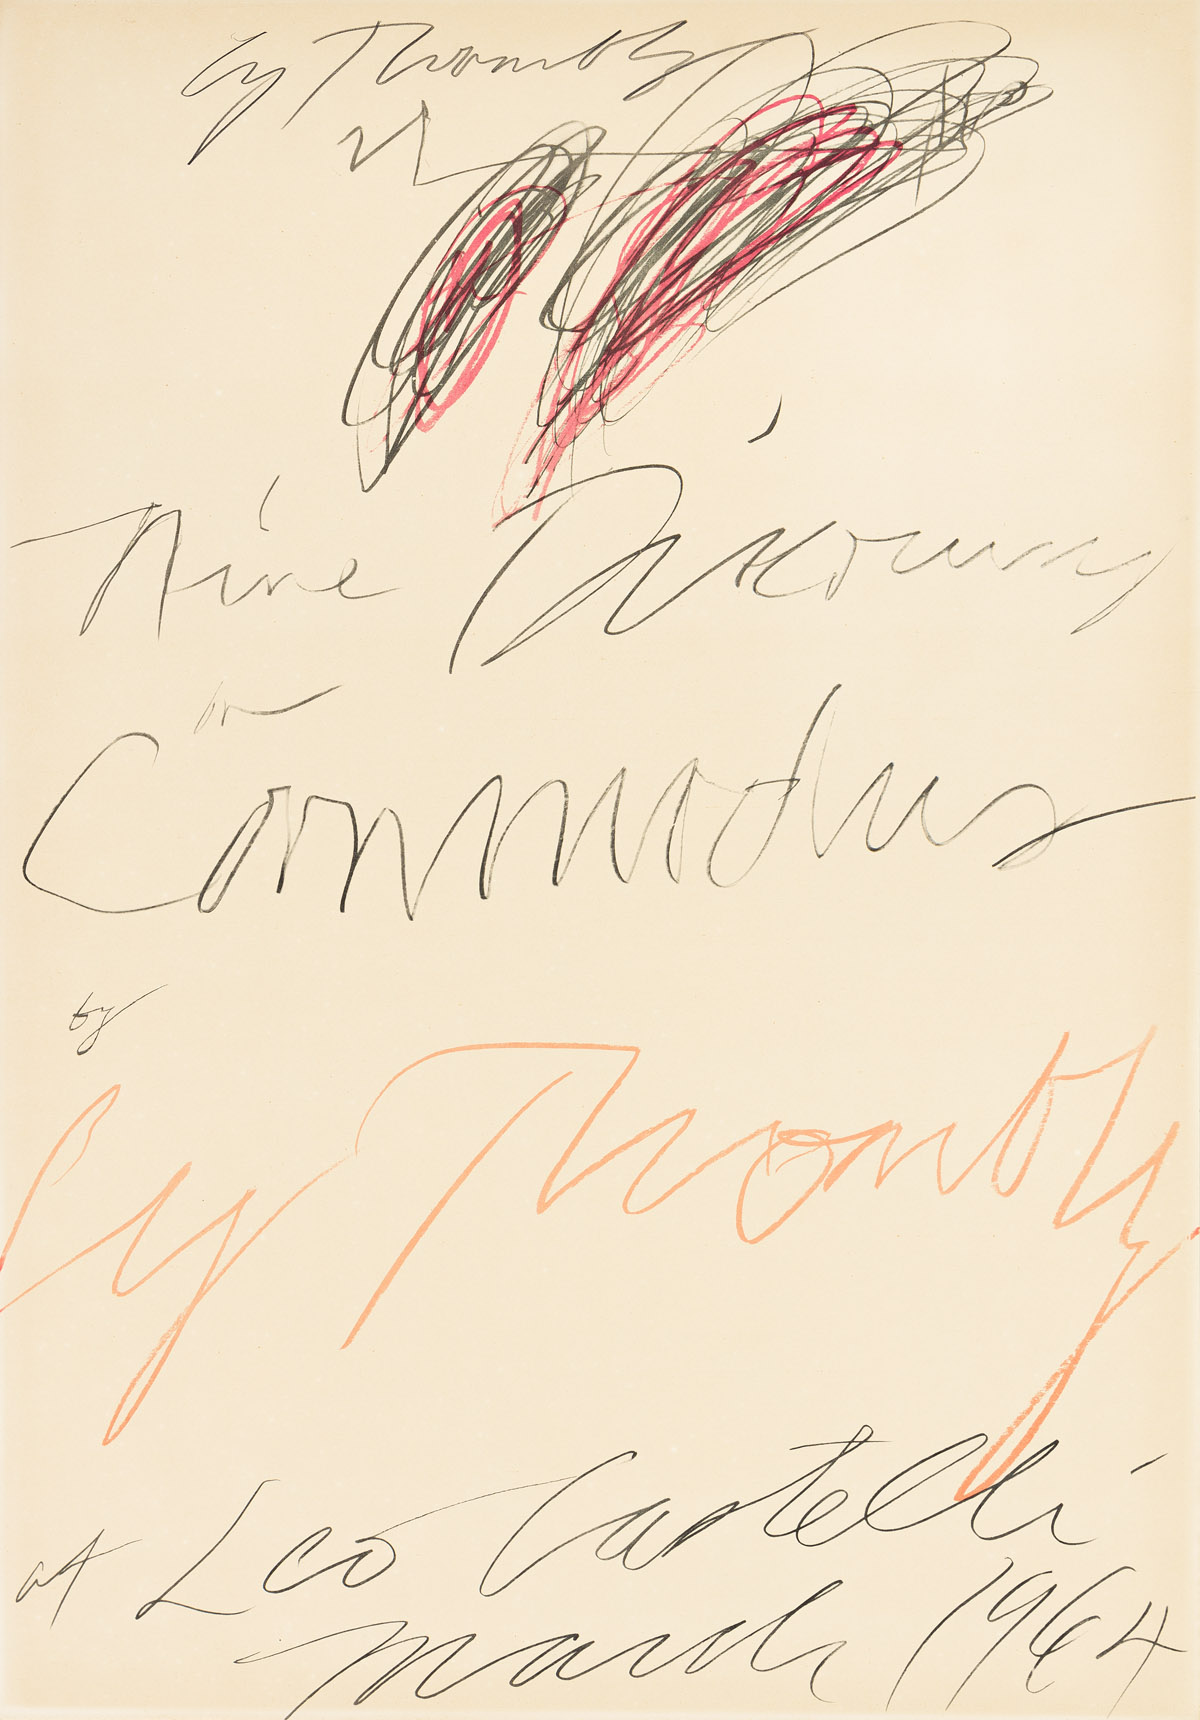 CY TWOMBLY (after)Nine Discourses on Commodus by Cy Twombly at Leo Castelli, 1964